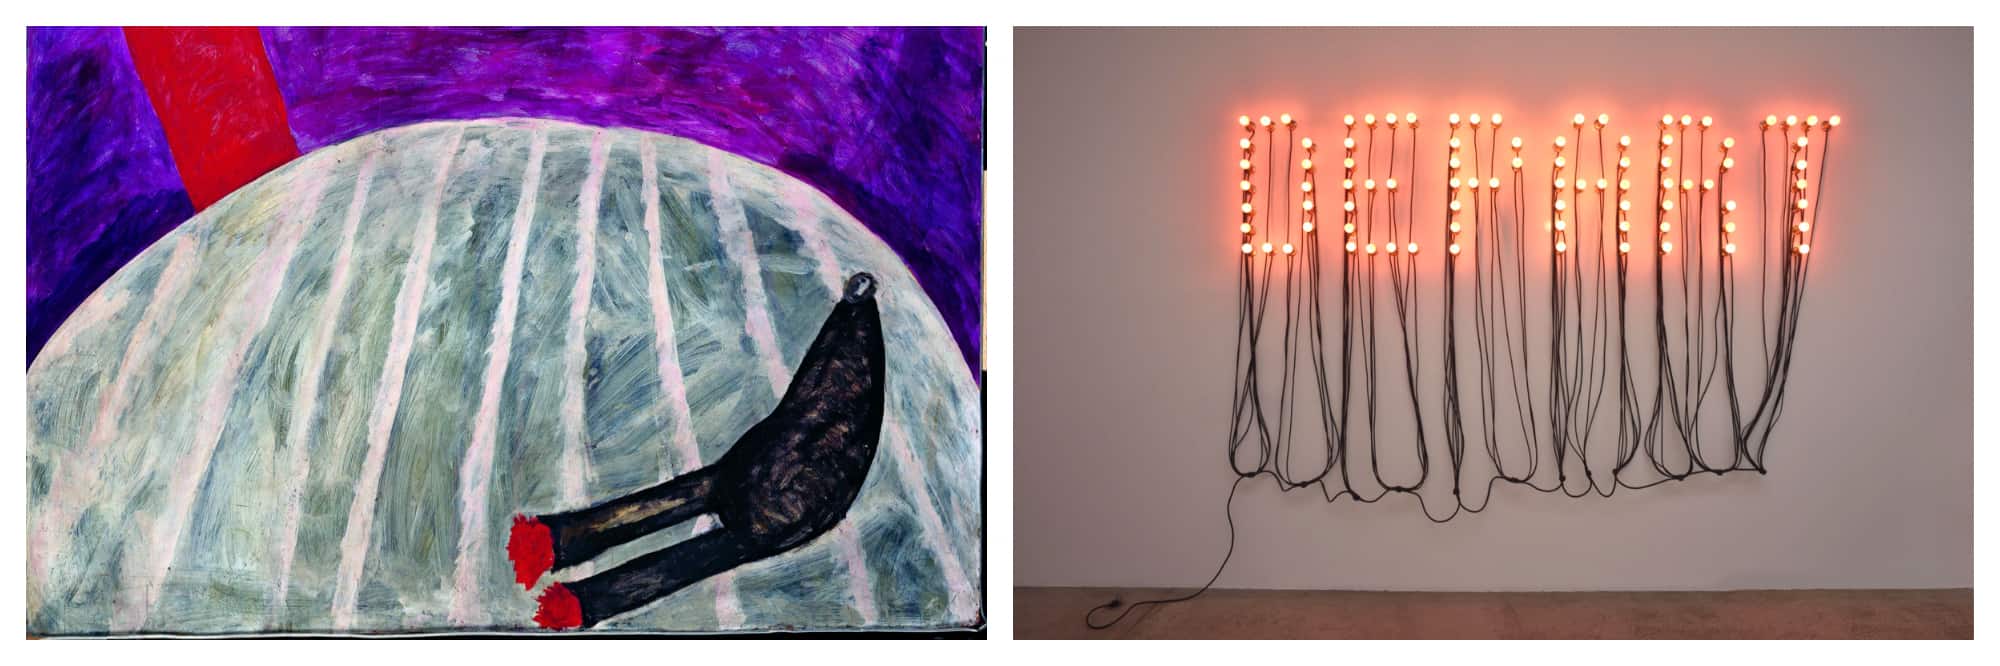 Left, a painting by Boltanski at his exhibition in Paris. Right, neon sign spelling out "departure" in French.